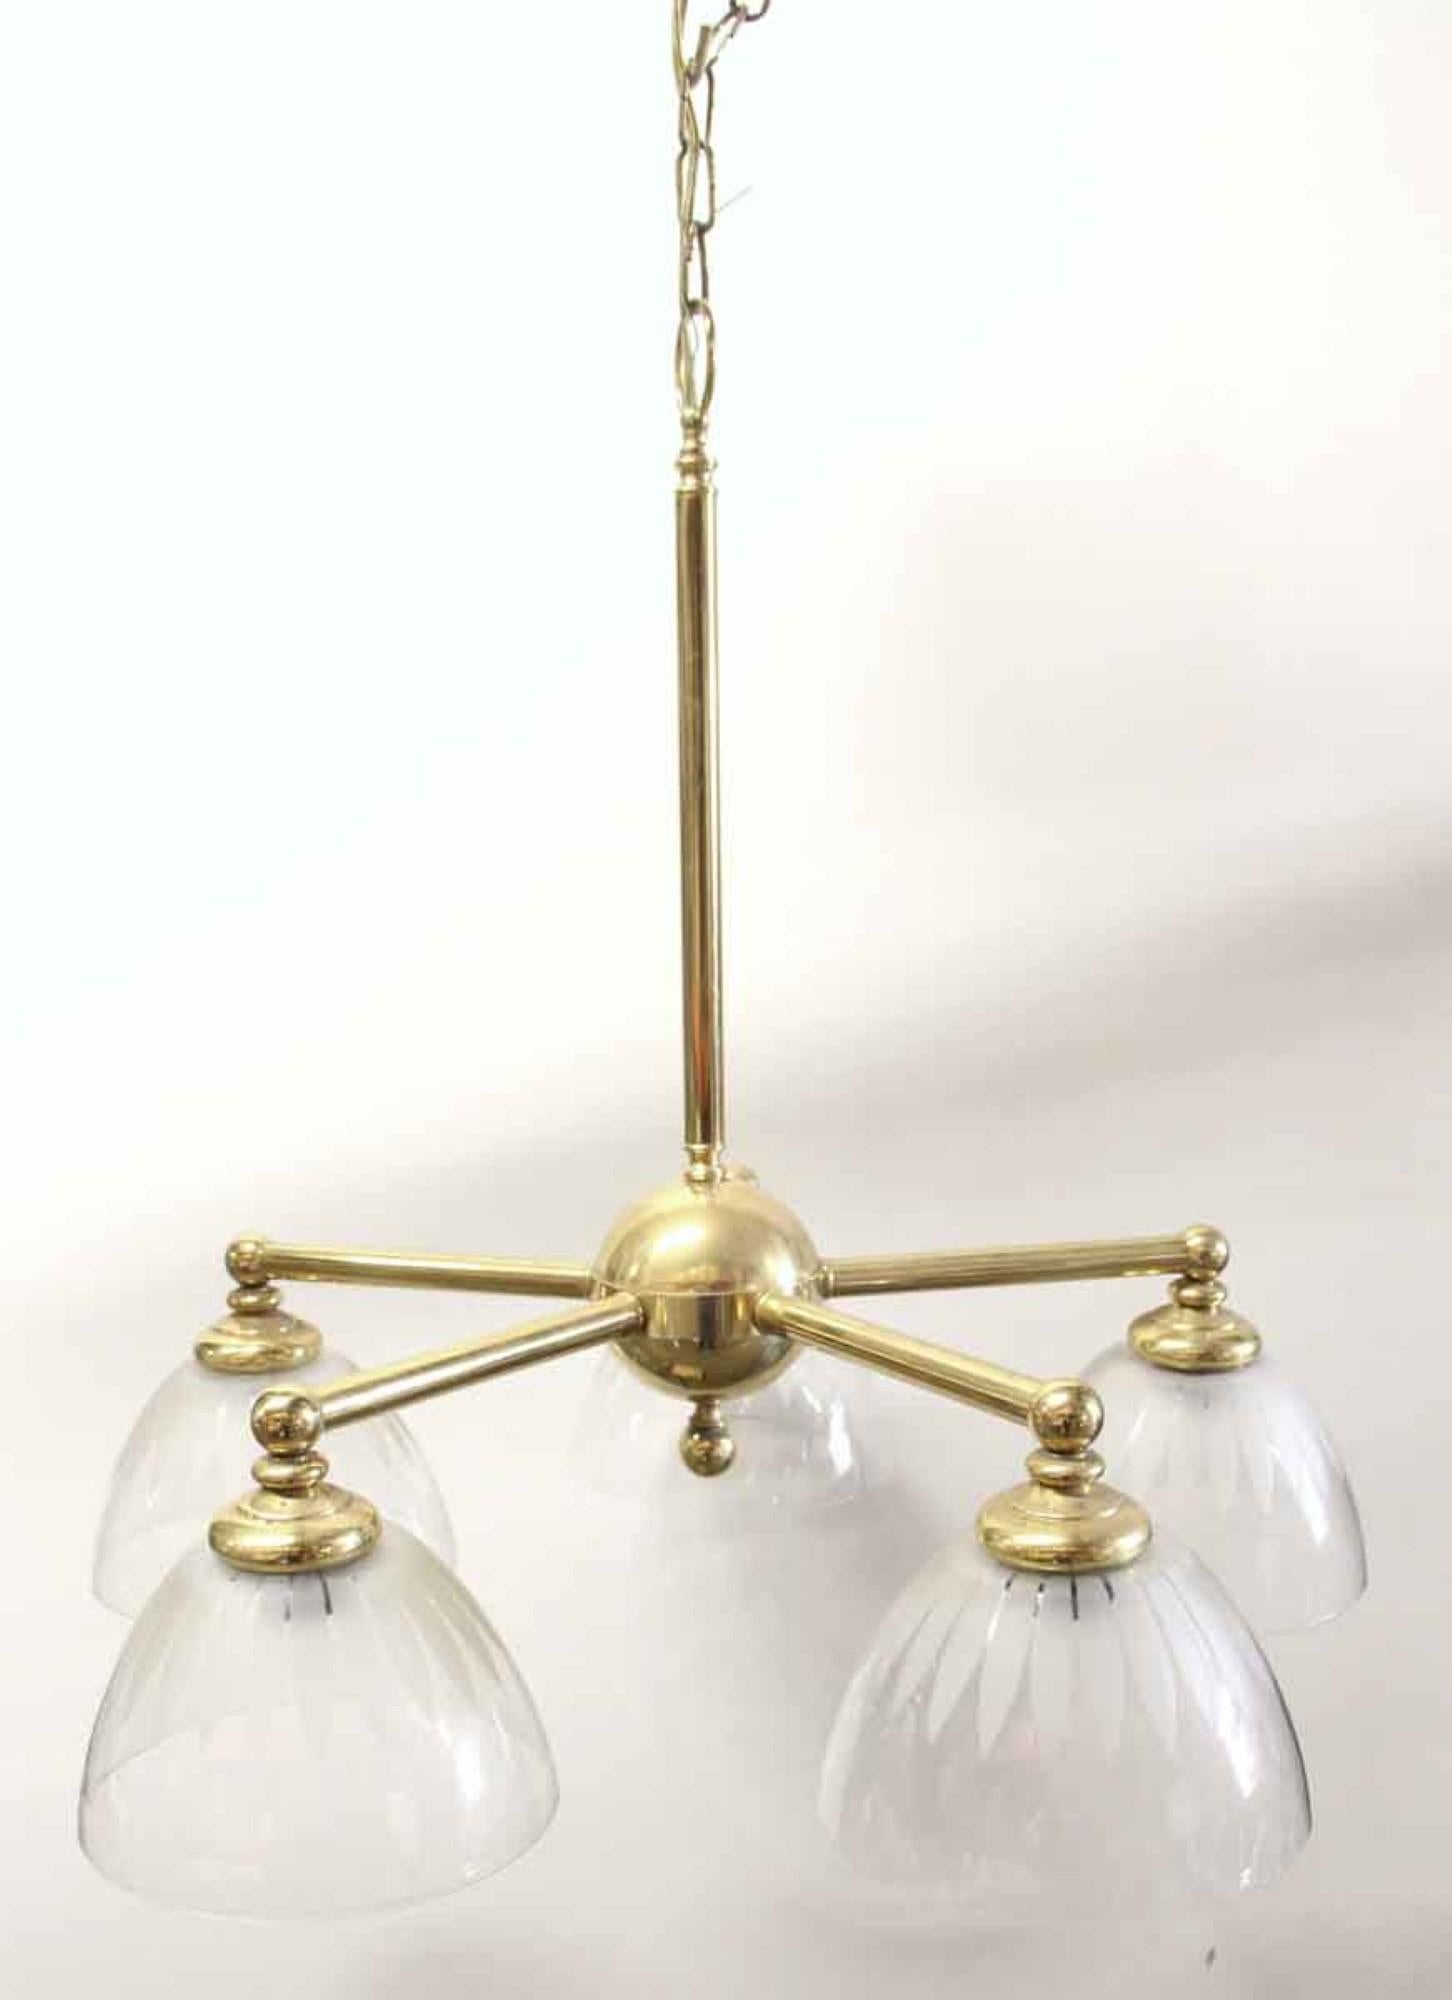 1970s polished brass down light fixture with etched round glass shades down in a Mid-Century Modern style. Price includes restoration. This can be seen at our 302 Bowery location in NoHo in Manhattan.